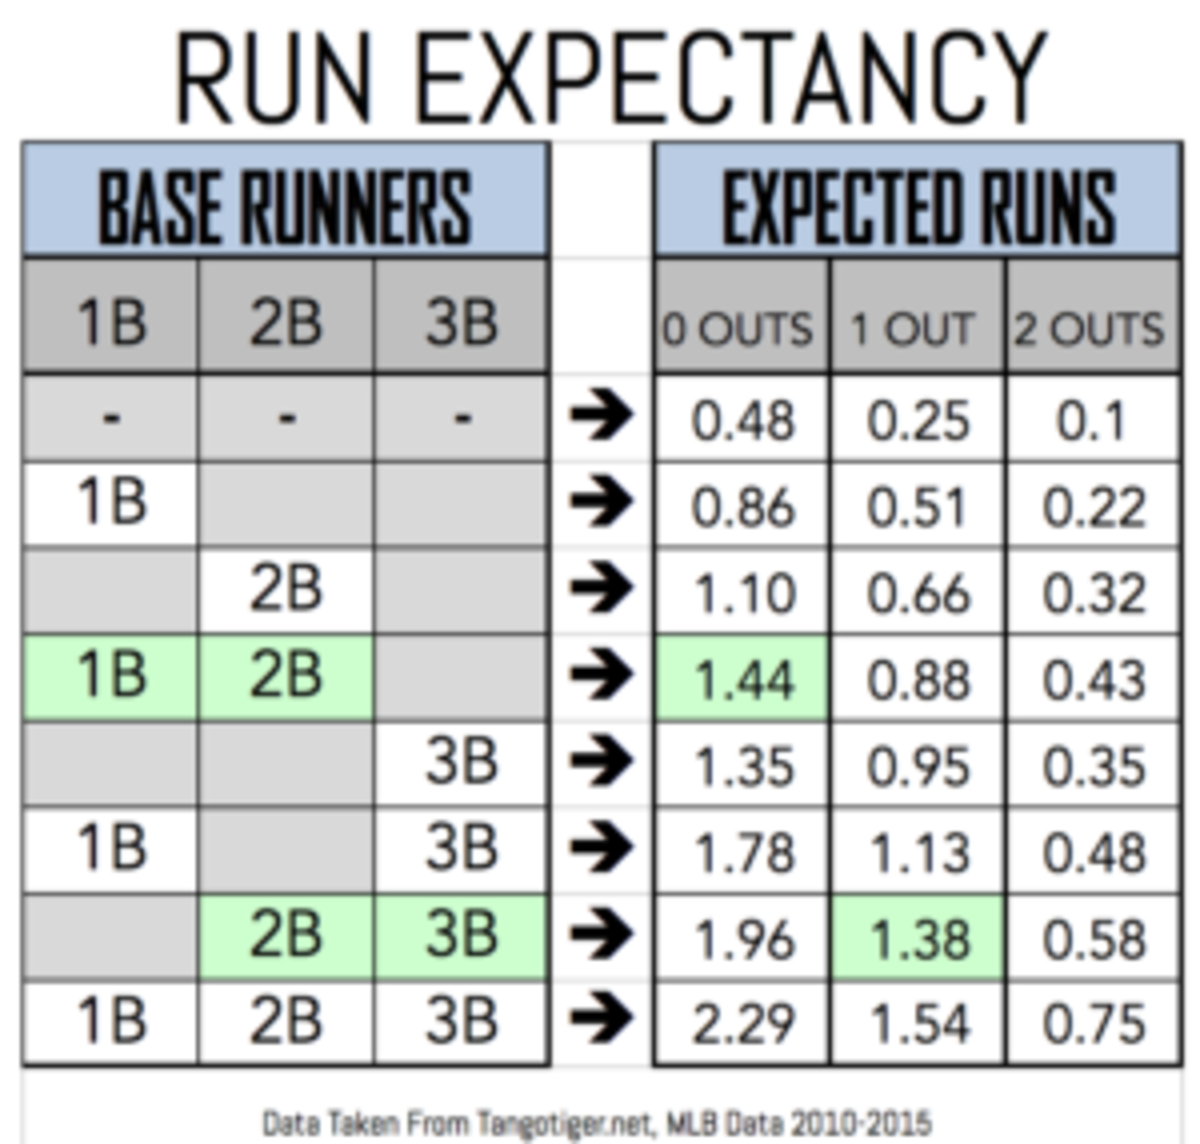 Here is a small run expectancy chart from Tantotiger. This is from 2010-2015, but the point is you should not give up outs, unless you're only playing for one run late in games.